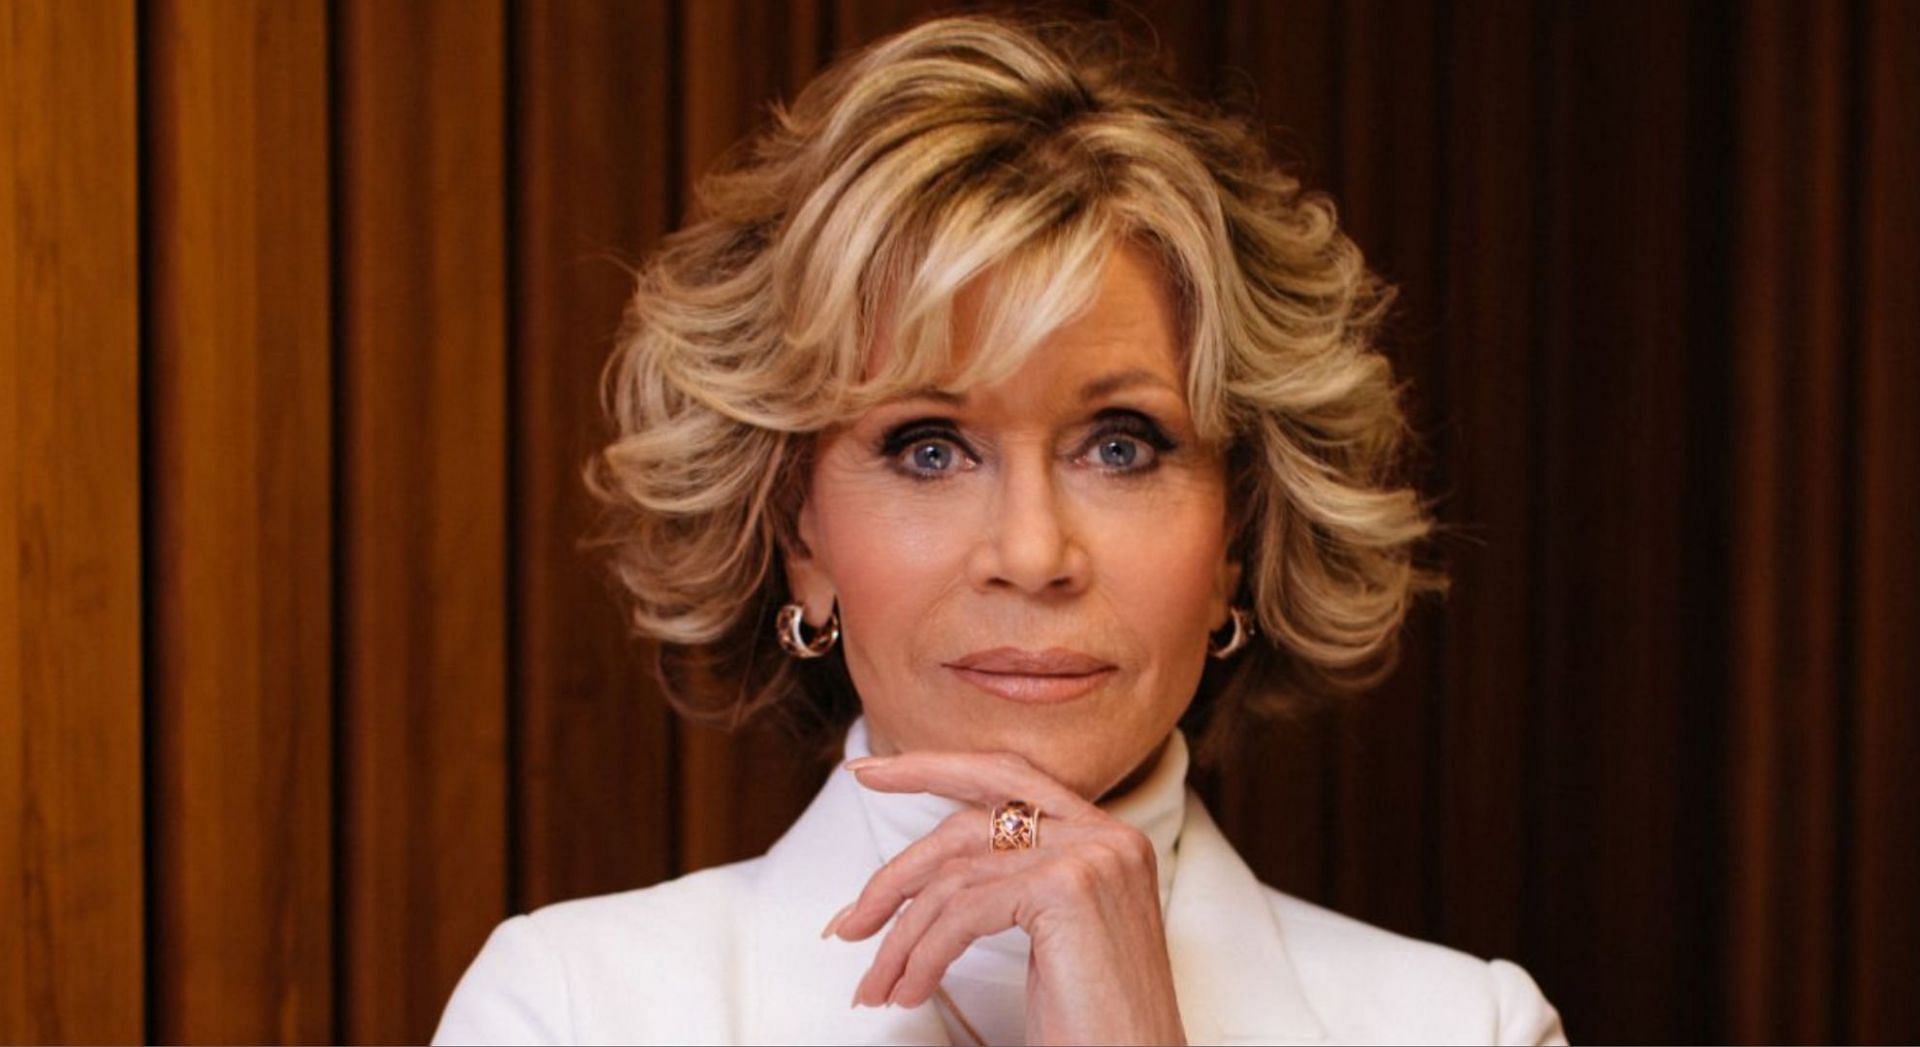 Jane Fonda came under fire for her &quot;murder&quot; remarks during 